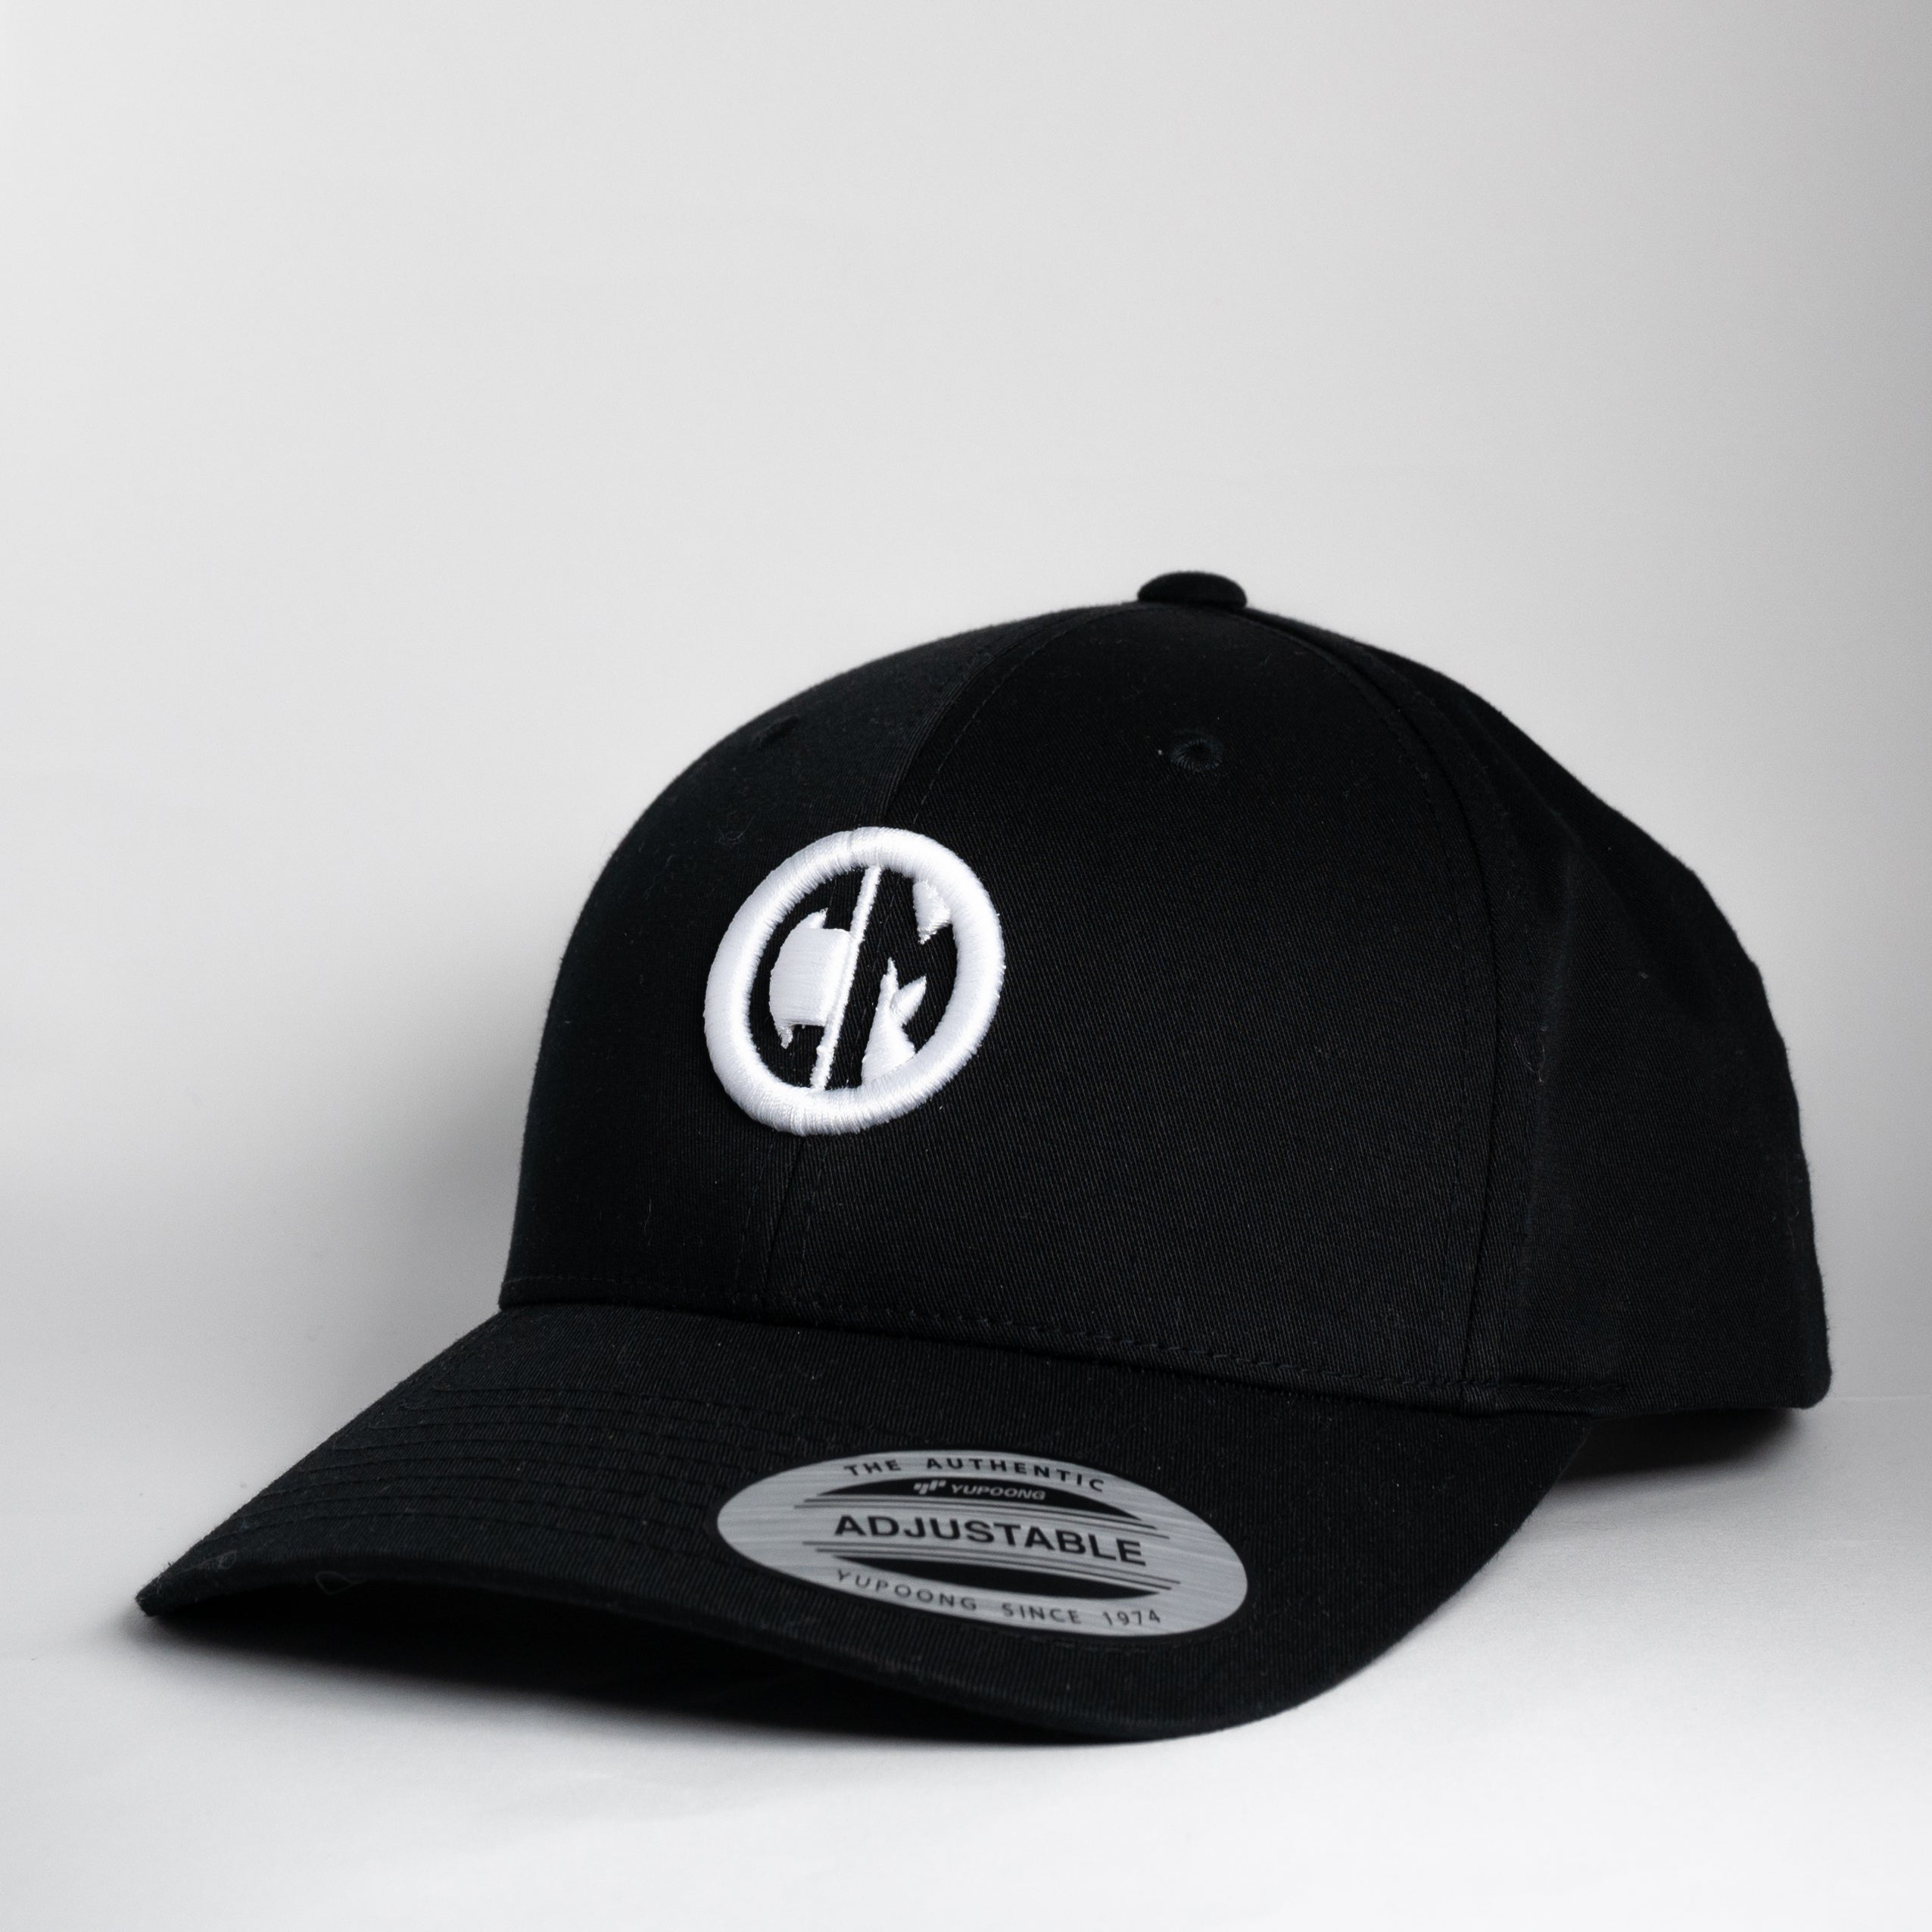 A black CycleMasters cap 